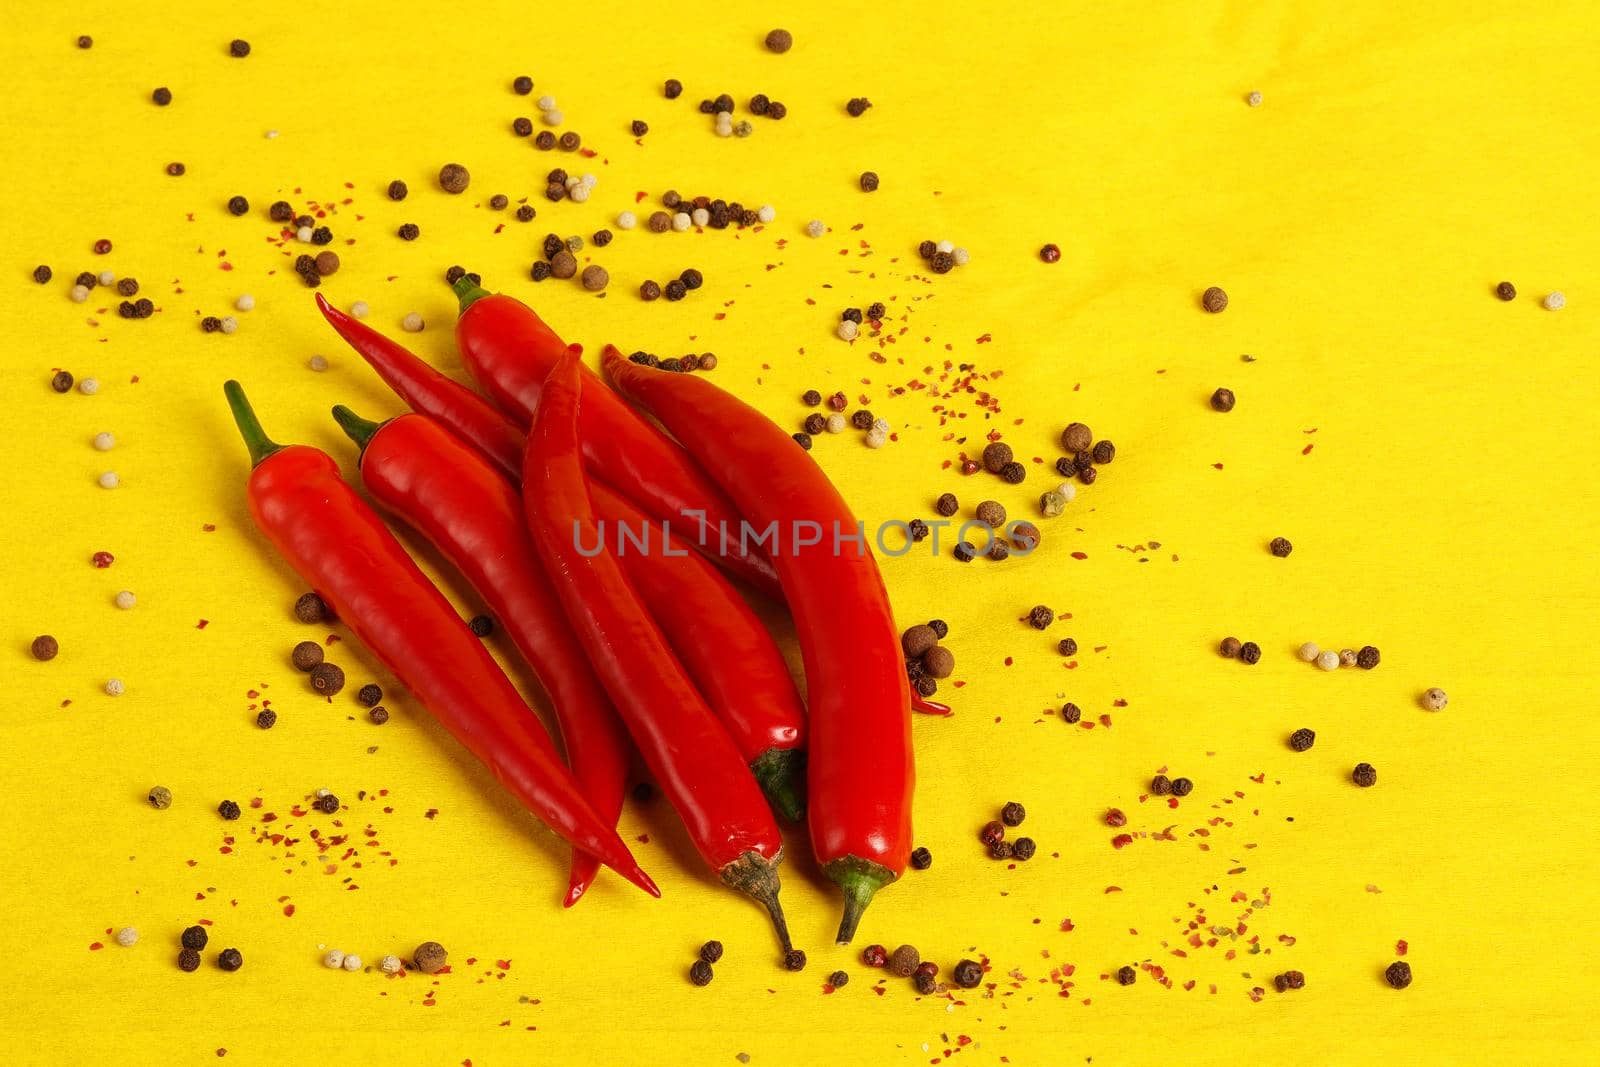 Red chili peppers on a yellow background, a close-up place for the inscription. High quality photo